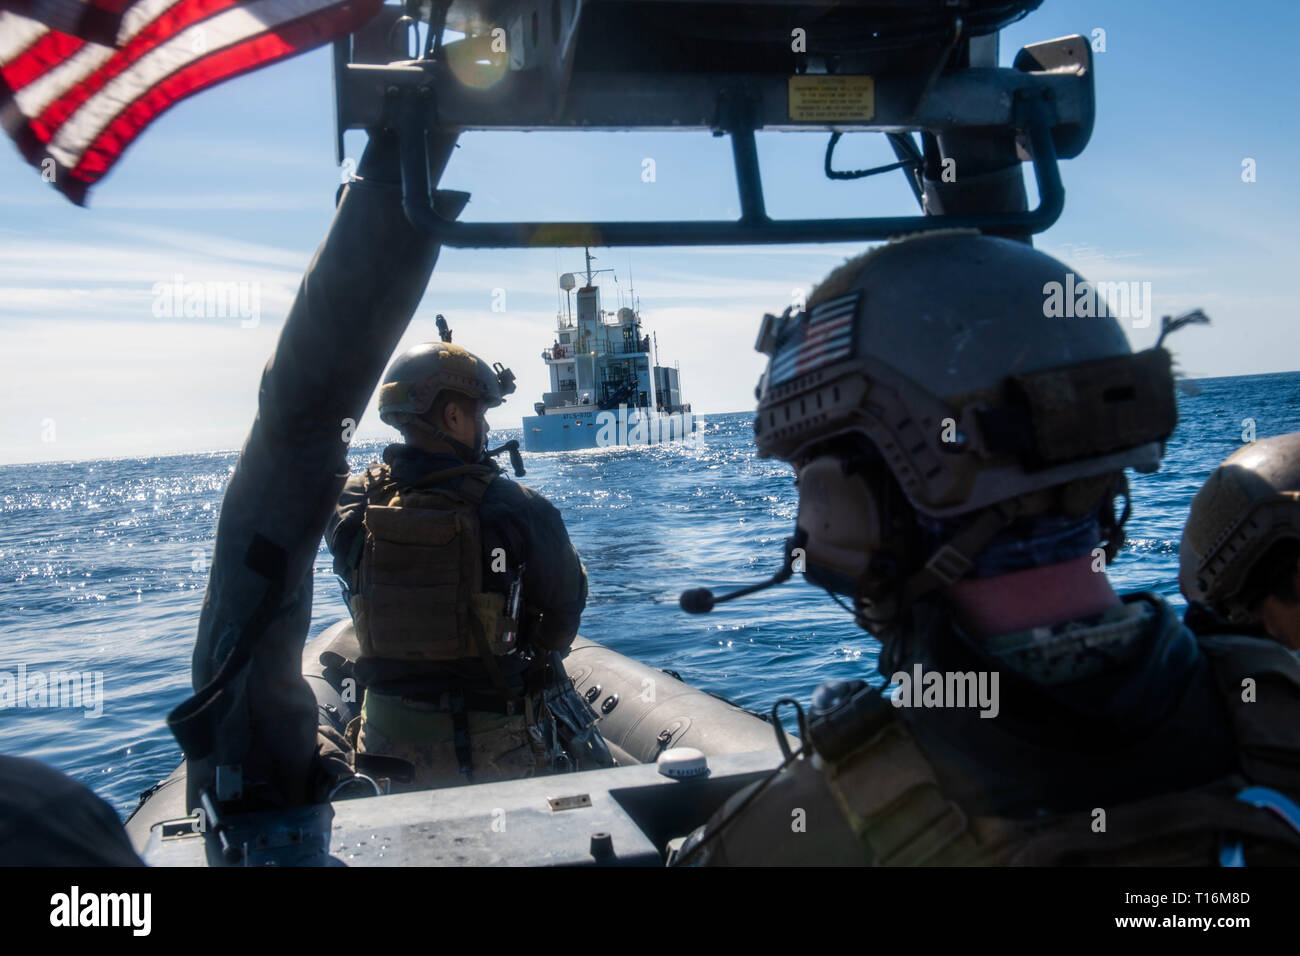 190322-N-HD110-0443  PACIFIC OCEAN (March 22, 2019) Sailors assigned to Assault Craft Unit (ACU) 1 observe motor vessel MV ATLS-9701 during a visit, board, search, and seizure (VBSS) exercise conducted by VBSS team attached to the Harpers Ferry-class amphibious dock landing ship USS Harpers Ferry (LSD 49). Harpers Ferry is underway conducting routine operations as a part of USS Boxer Amphibious Ready Group (ARG) in the eastern Pacific Ocean. (U.S. Navy photo by Mass Communication Specialist 3rd Class Danielle A. Baker) Stock Photo